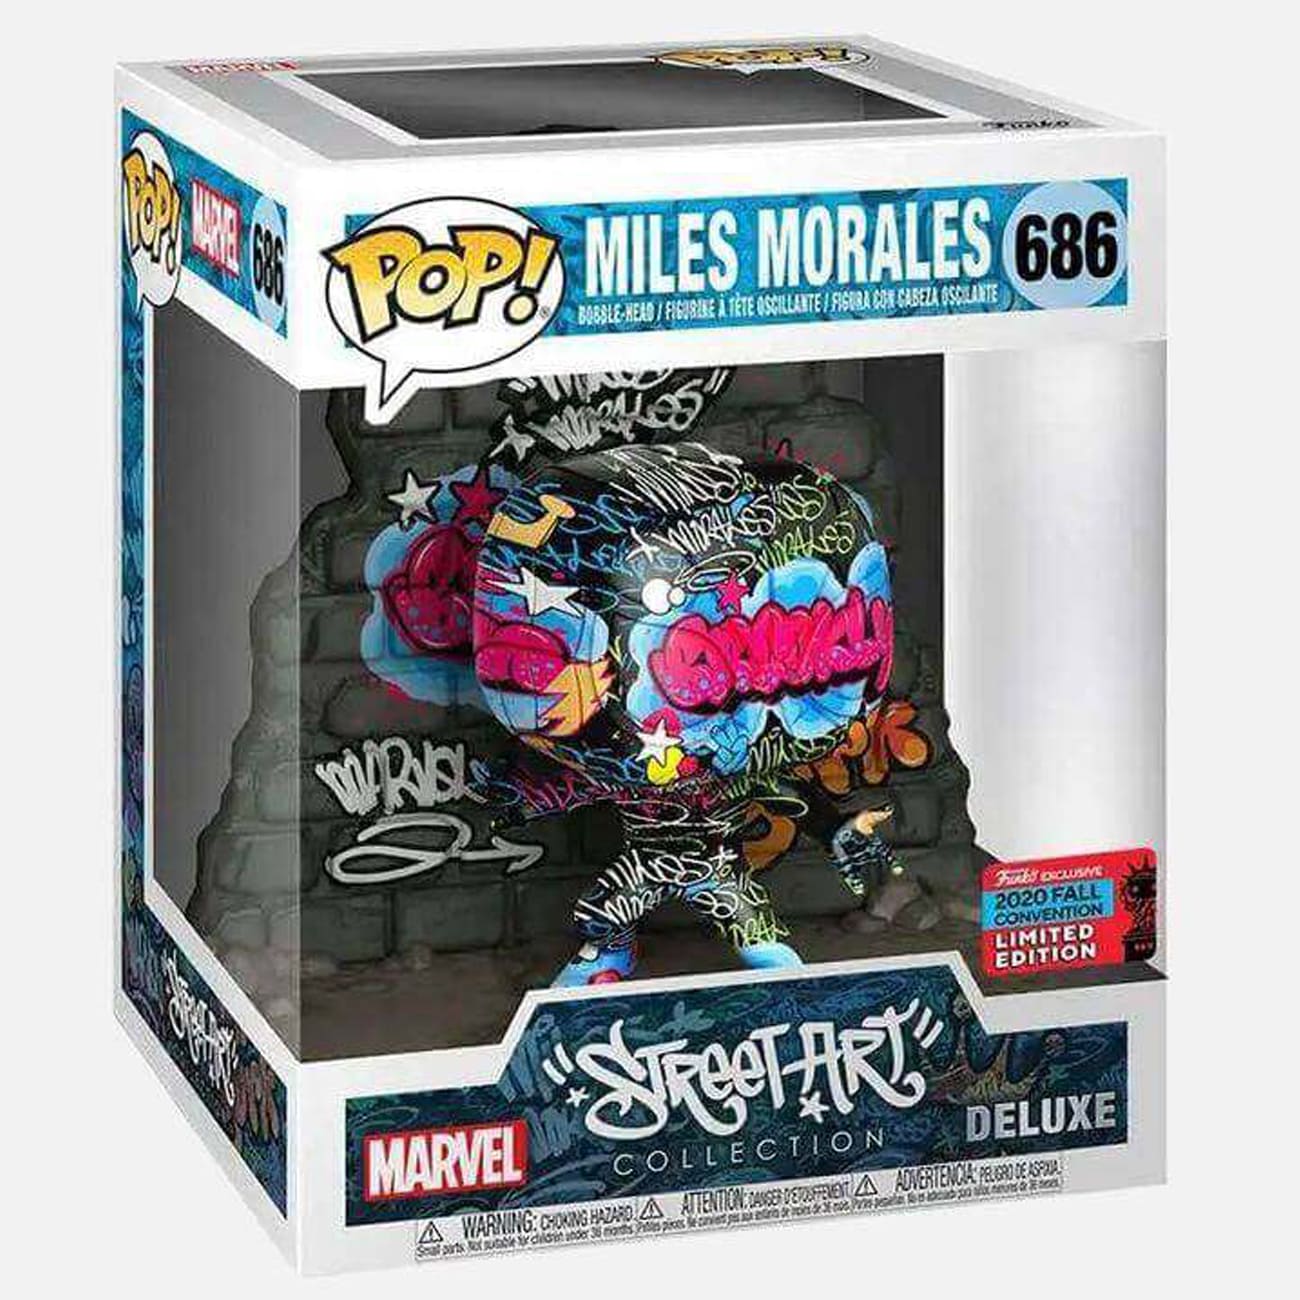 фигурка funko pop bobble marvel games miles morales miles morales s t r i k e suit 766 50151 Фигурка Funko POP! Marvel Street Art Spider-Man Miles Morales Grafitti NYCC Fall Shared Exclusive 2020